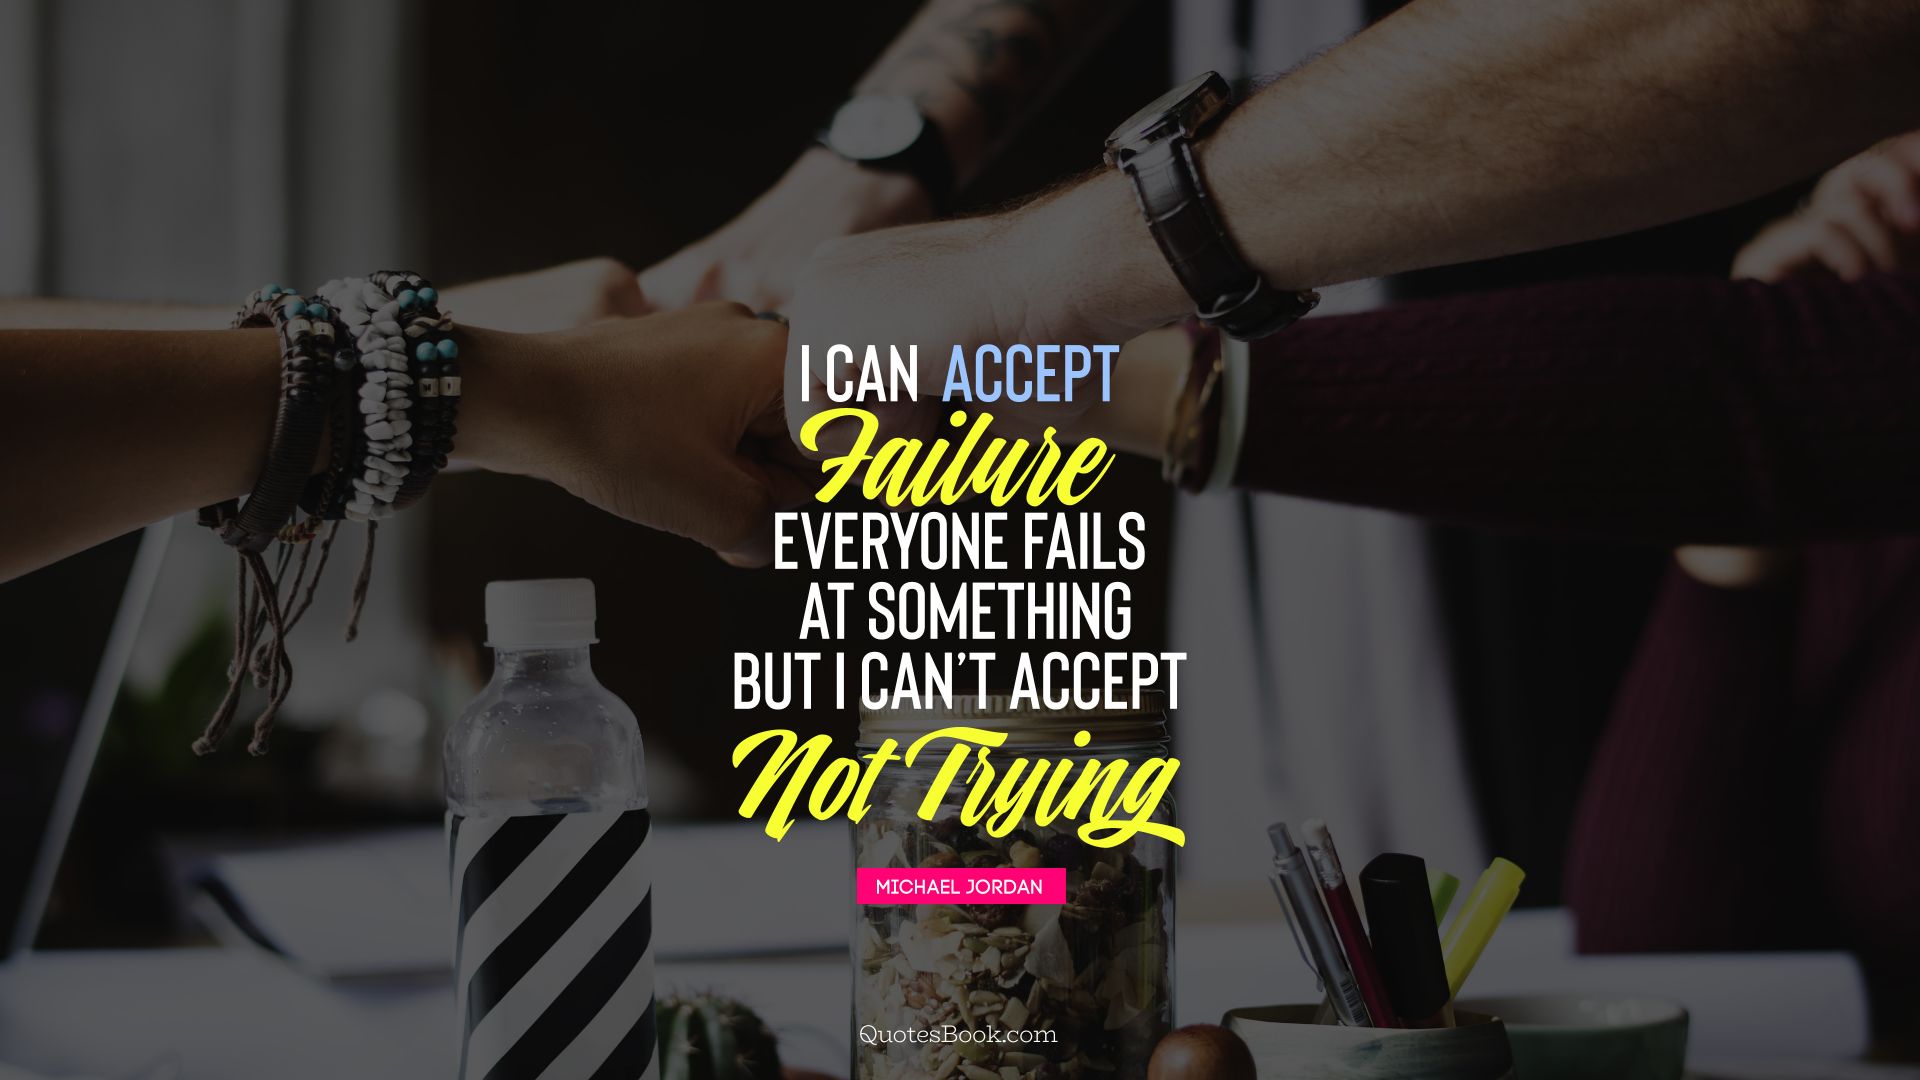 I can accept failure, everyone fails at something but i can't accept not trying . - Quote by Michael Jordan